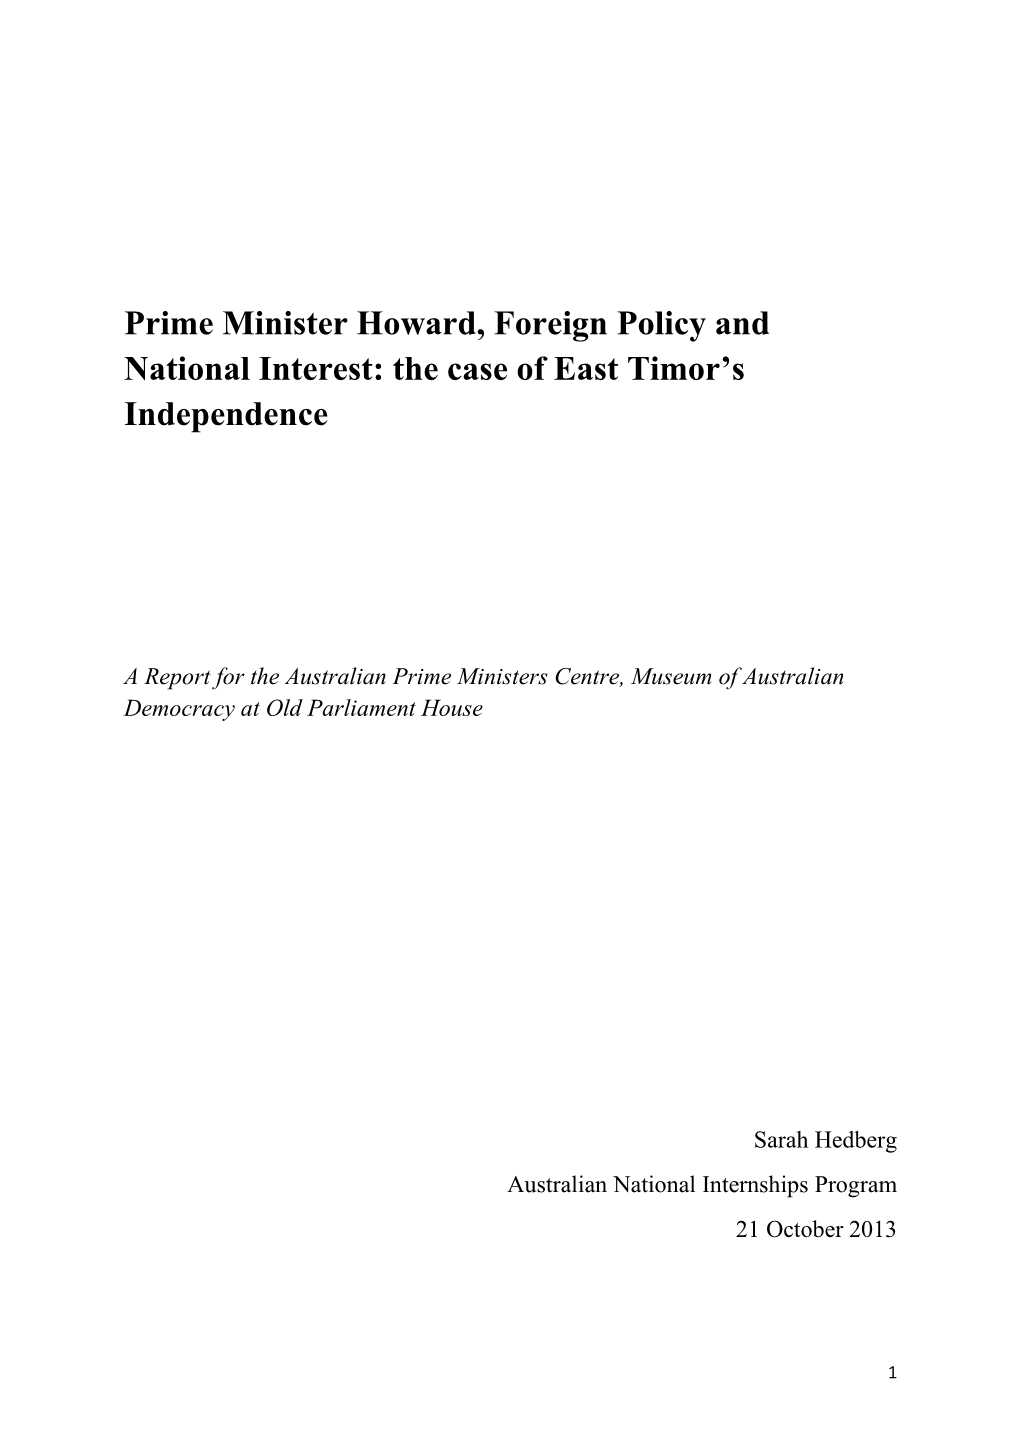 Prime Minister Howard, Foreign Policy and National Interest: the Case of East Timor’S Independence